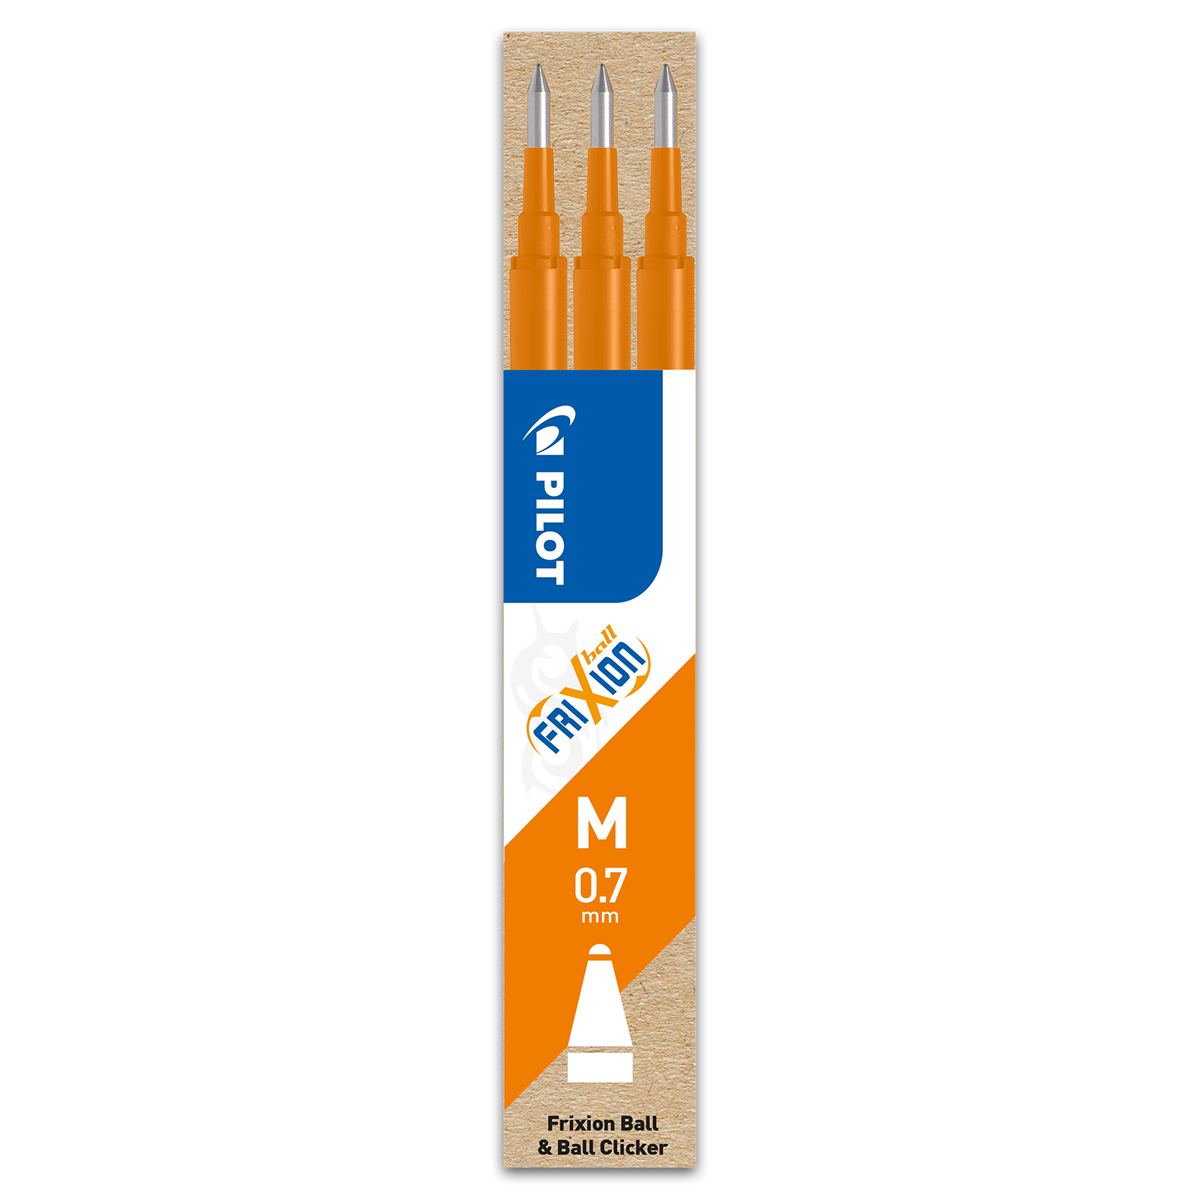 Pilot Refill for FriXion/FriXion Clicker Erasable Rollerball 0.7mm - Pack of 3